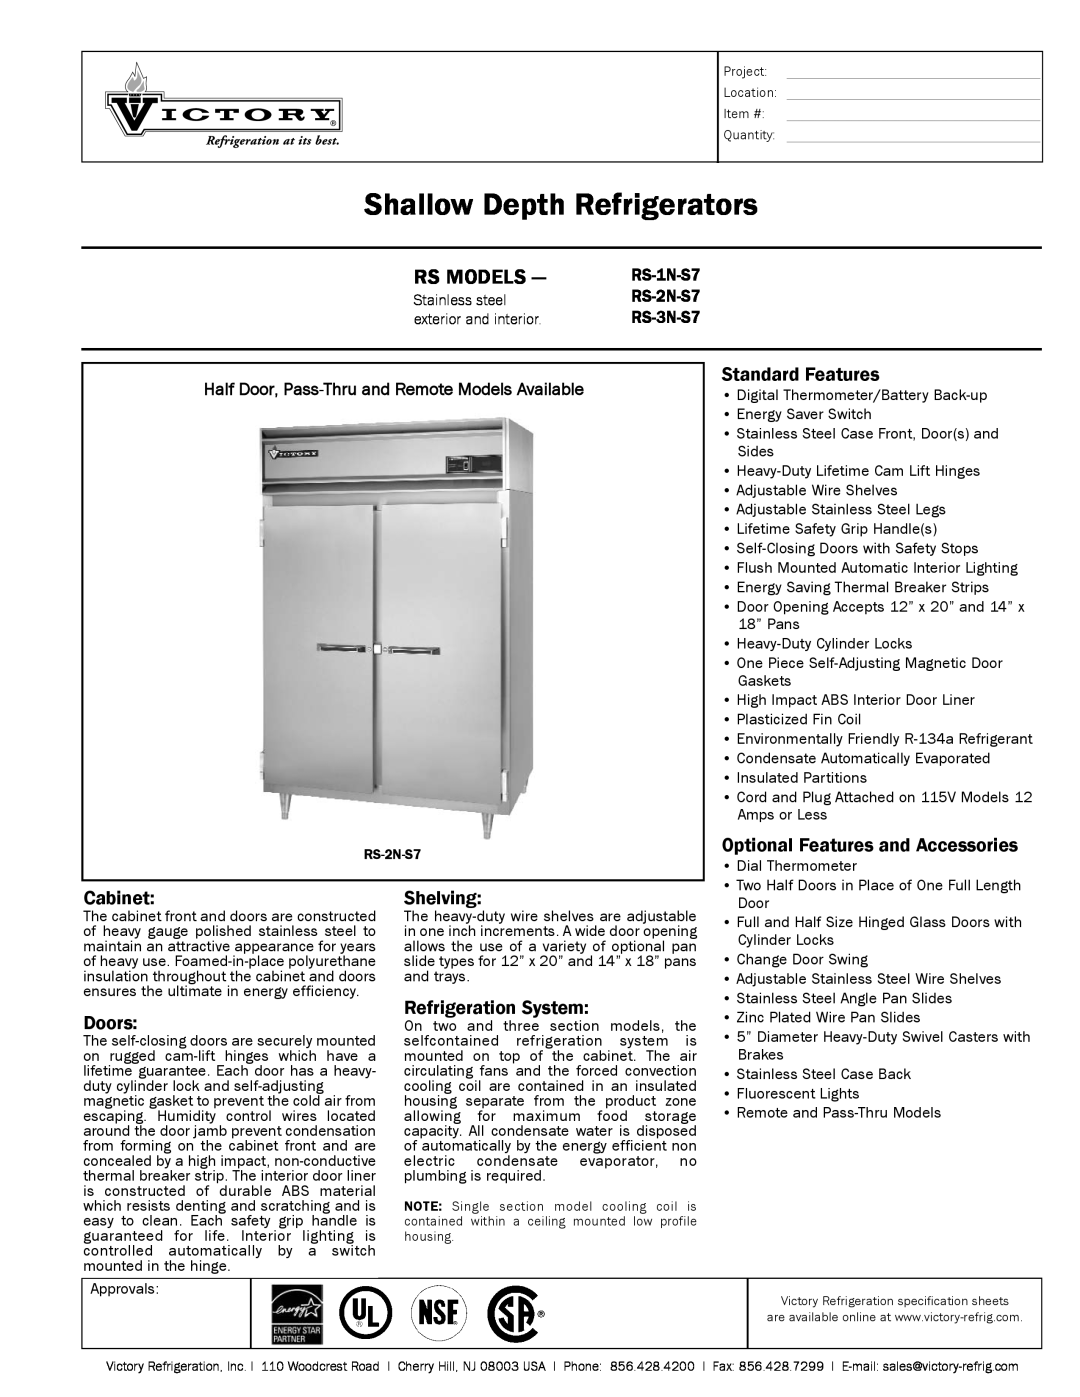 Victory Refrigeration RS-3N-S7 specifications Shallow Depth Refrigerators, Rs Models, Standard Features, Cabinet, Shelving 